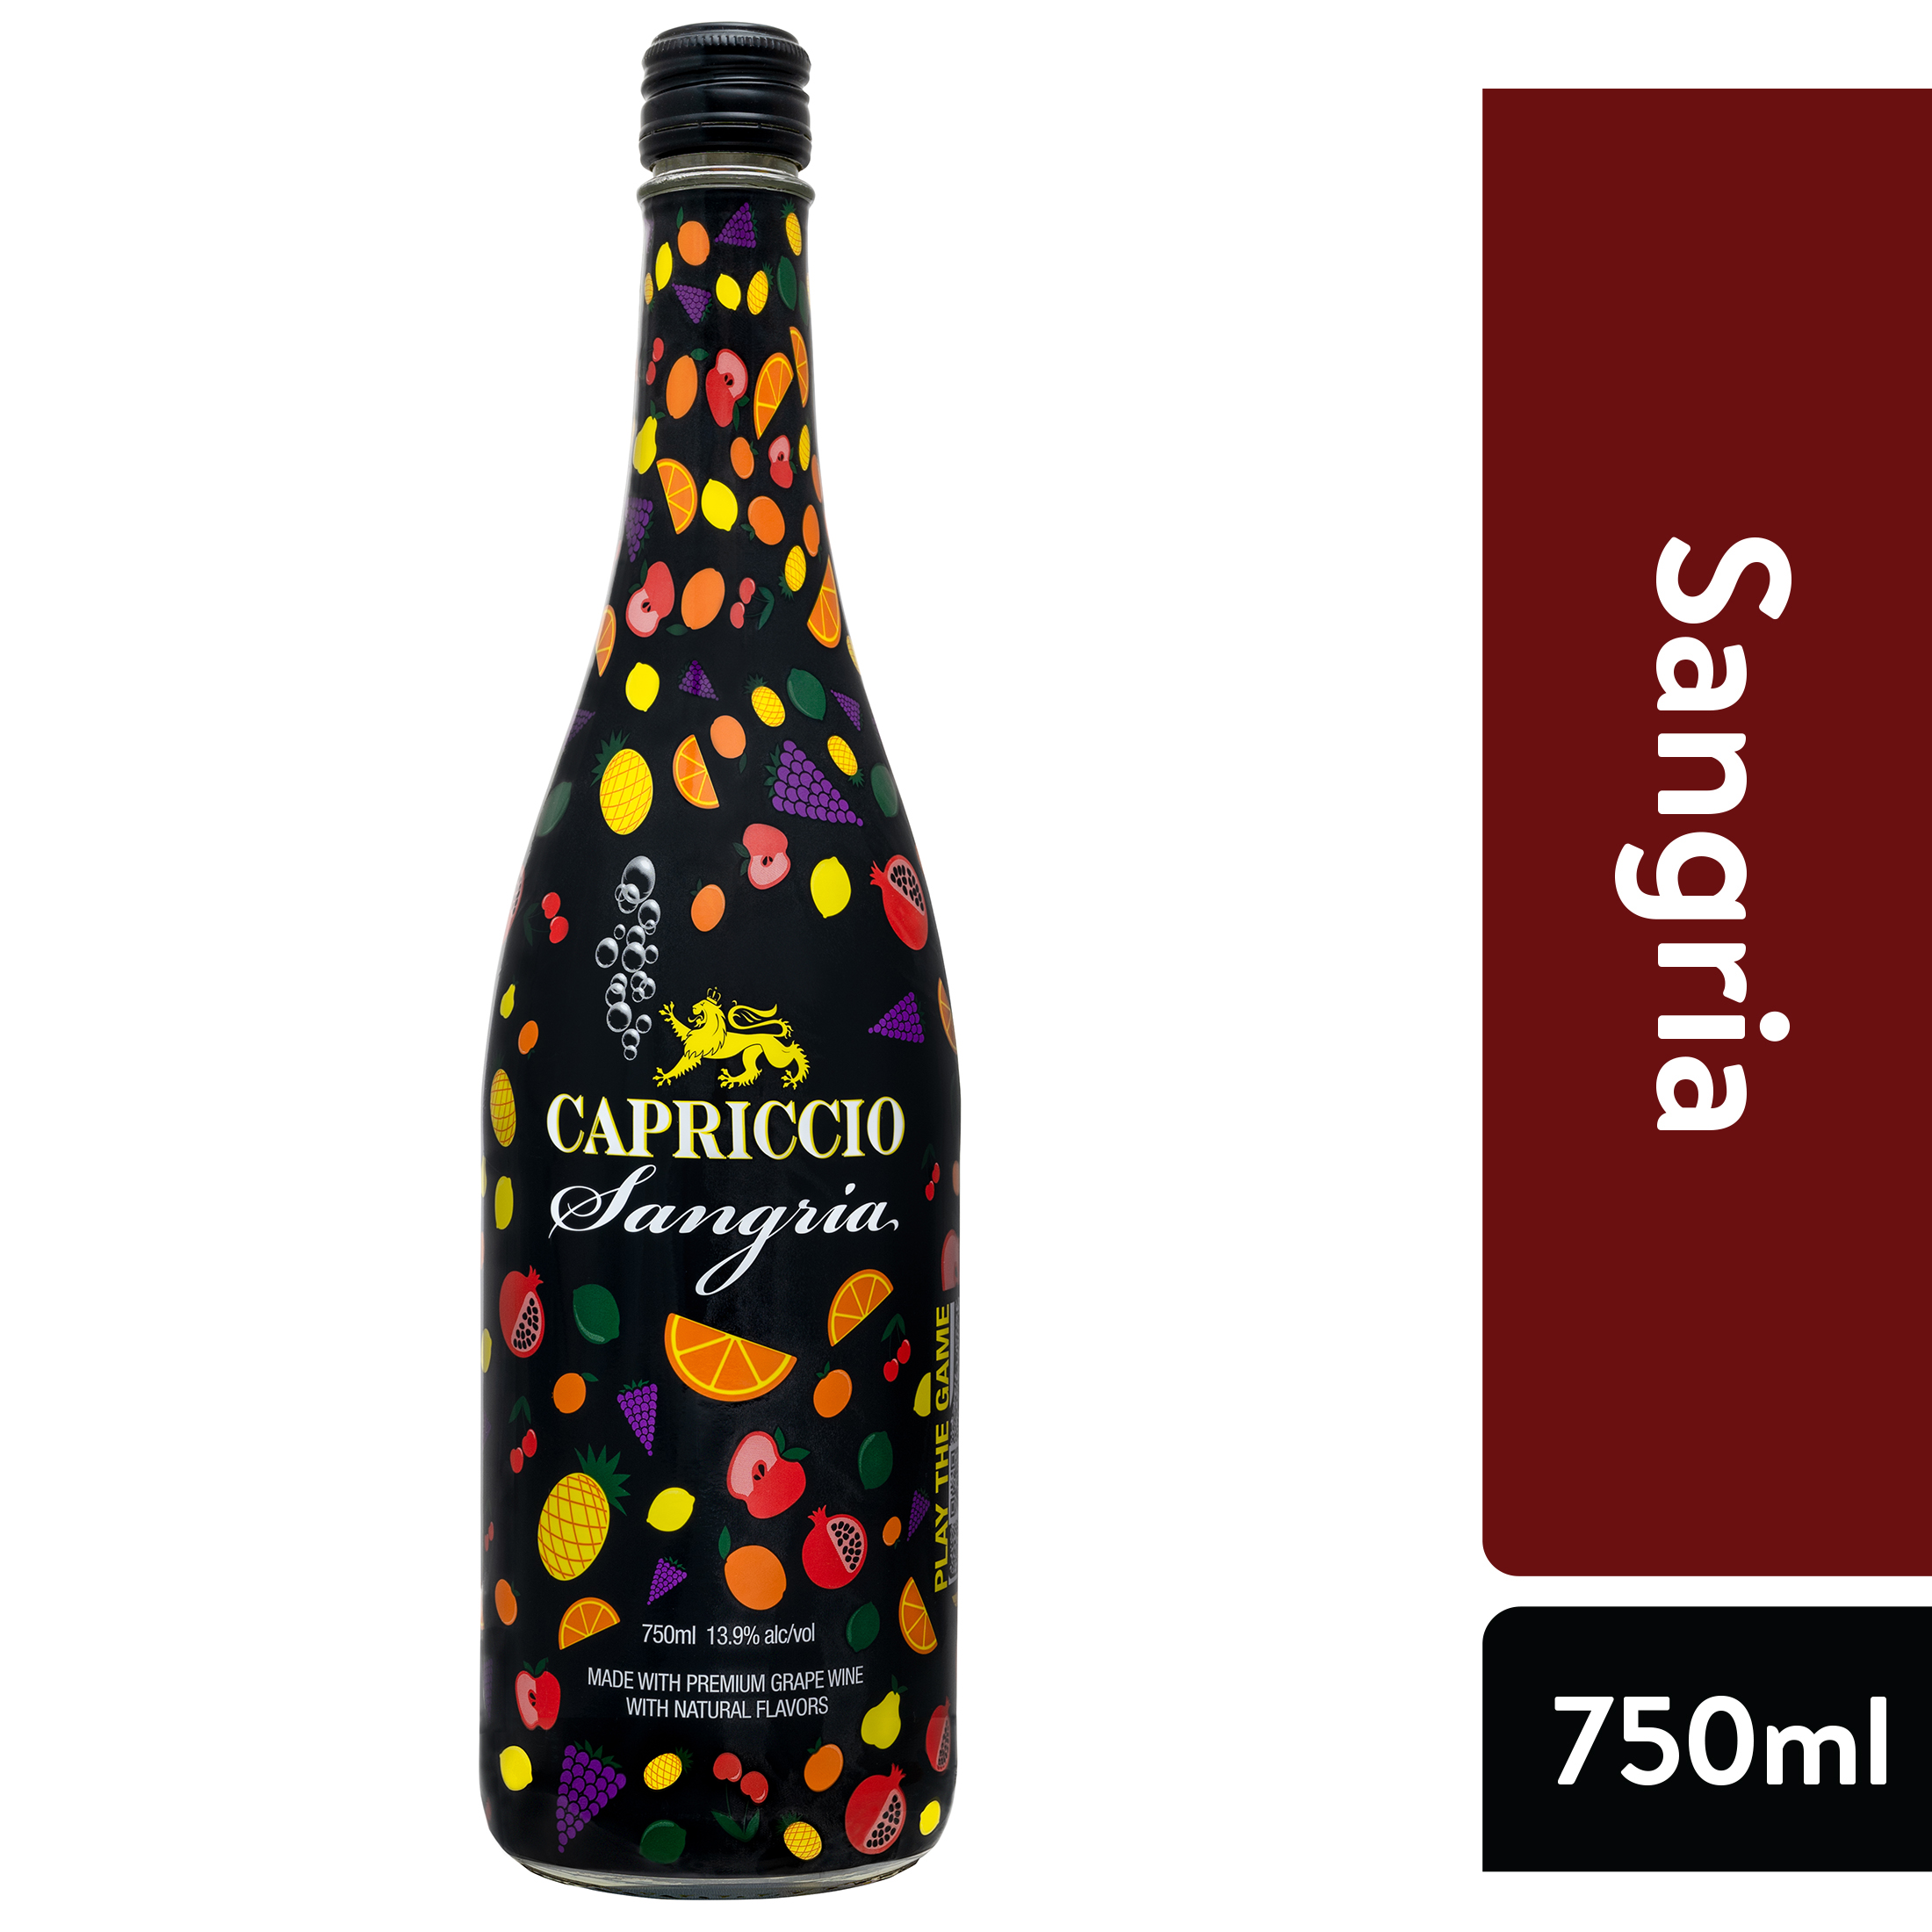 Capriccio Red Sangria Wine, Florida, 13.9% ABV, 750 ml Glass Bottle, 5-150ml Servings - image 1 of 5